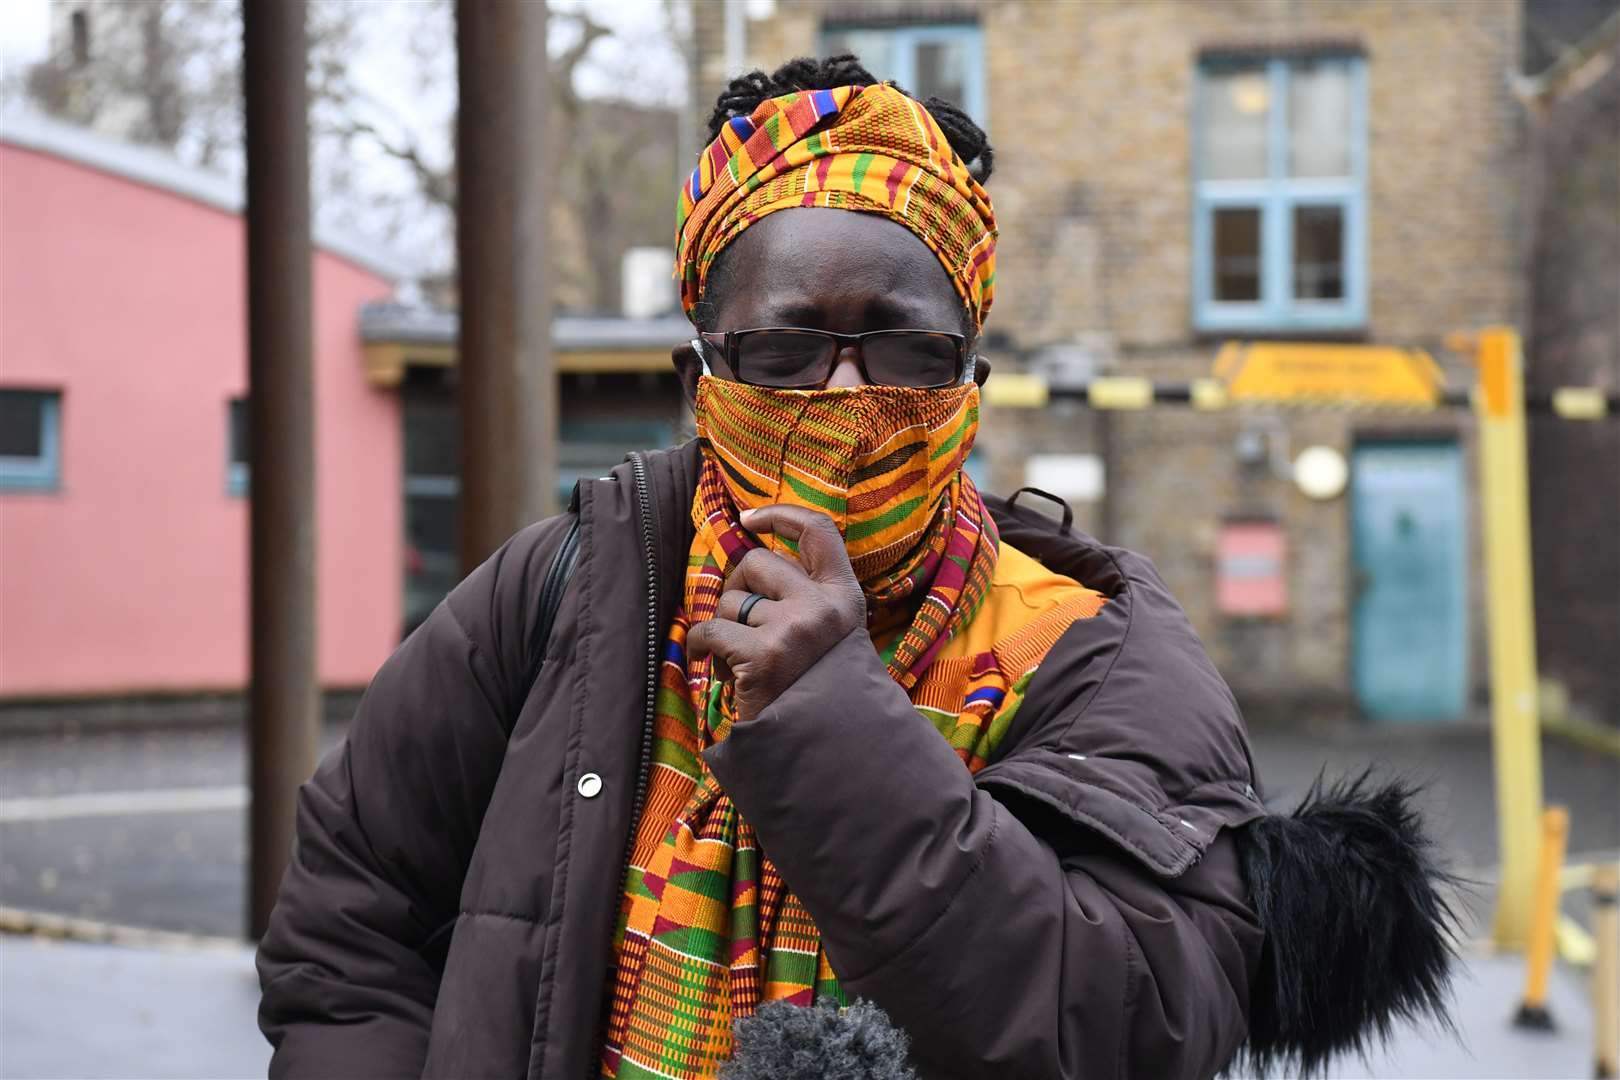 Ella Adoo-Kissi-Debrah’s mother Rosamund has campaigned for swift action on harmful levels of pollution (Kirsty O’Connor/PA)